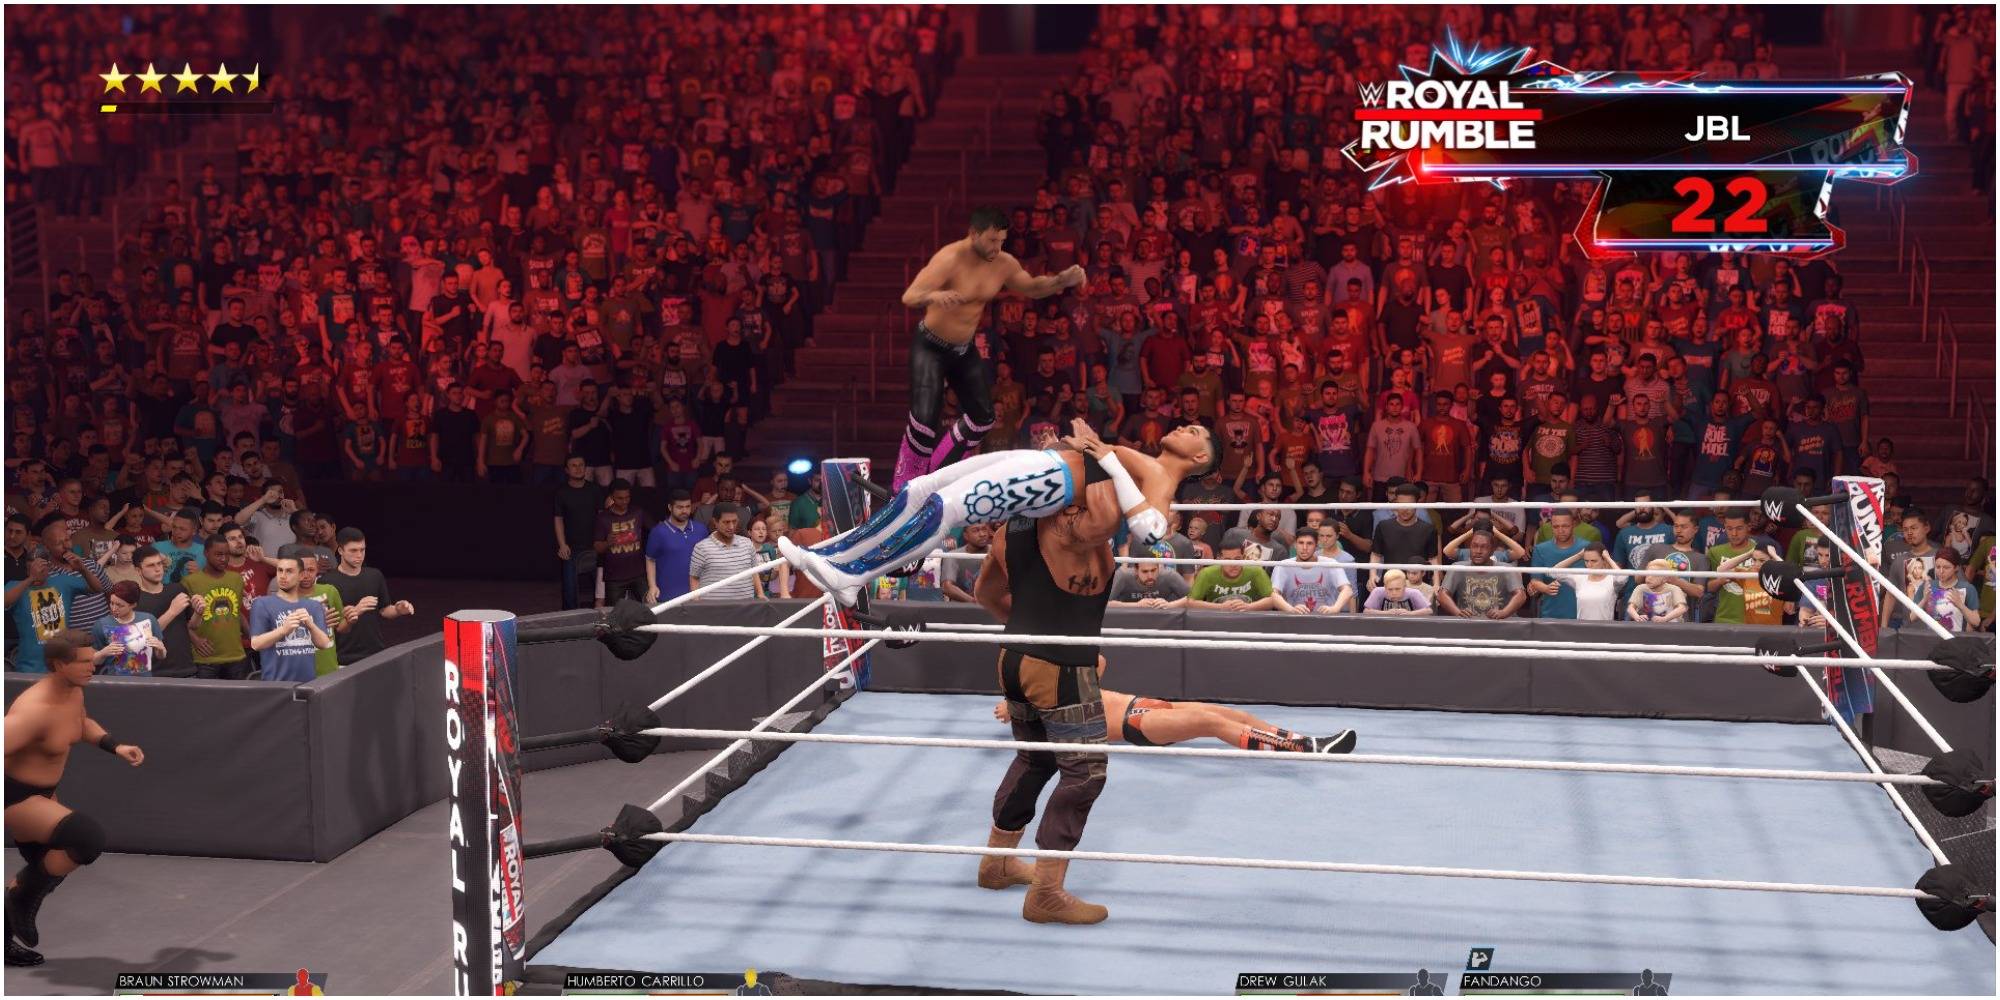 Wwe 2k22 how to win royal rumble